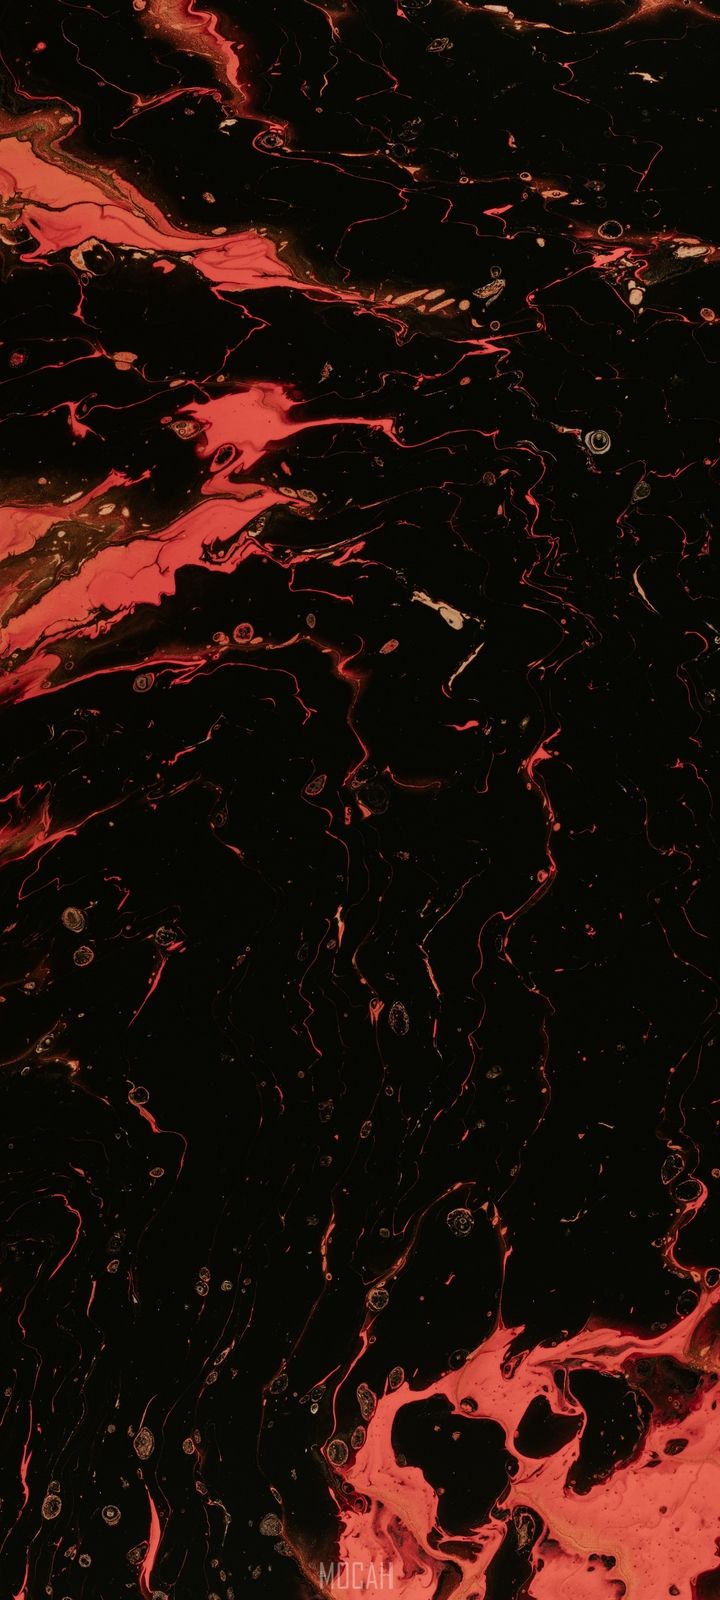 IPhone wallpaper with black and red marble background - Blood